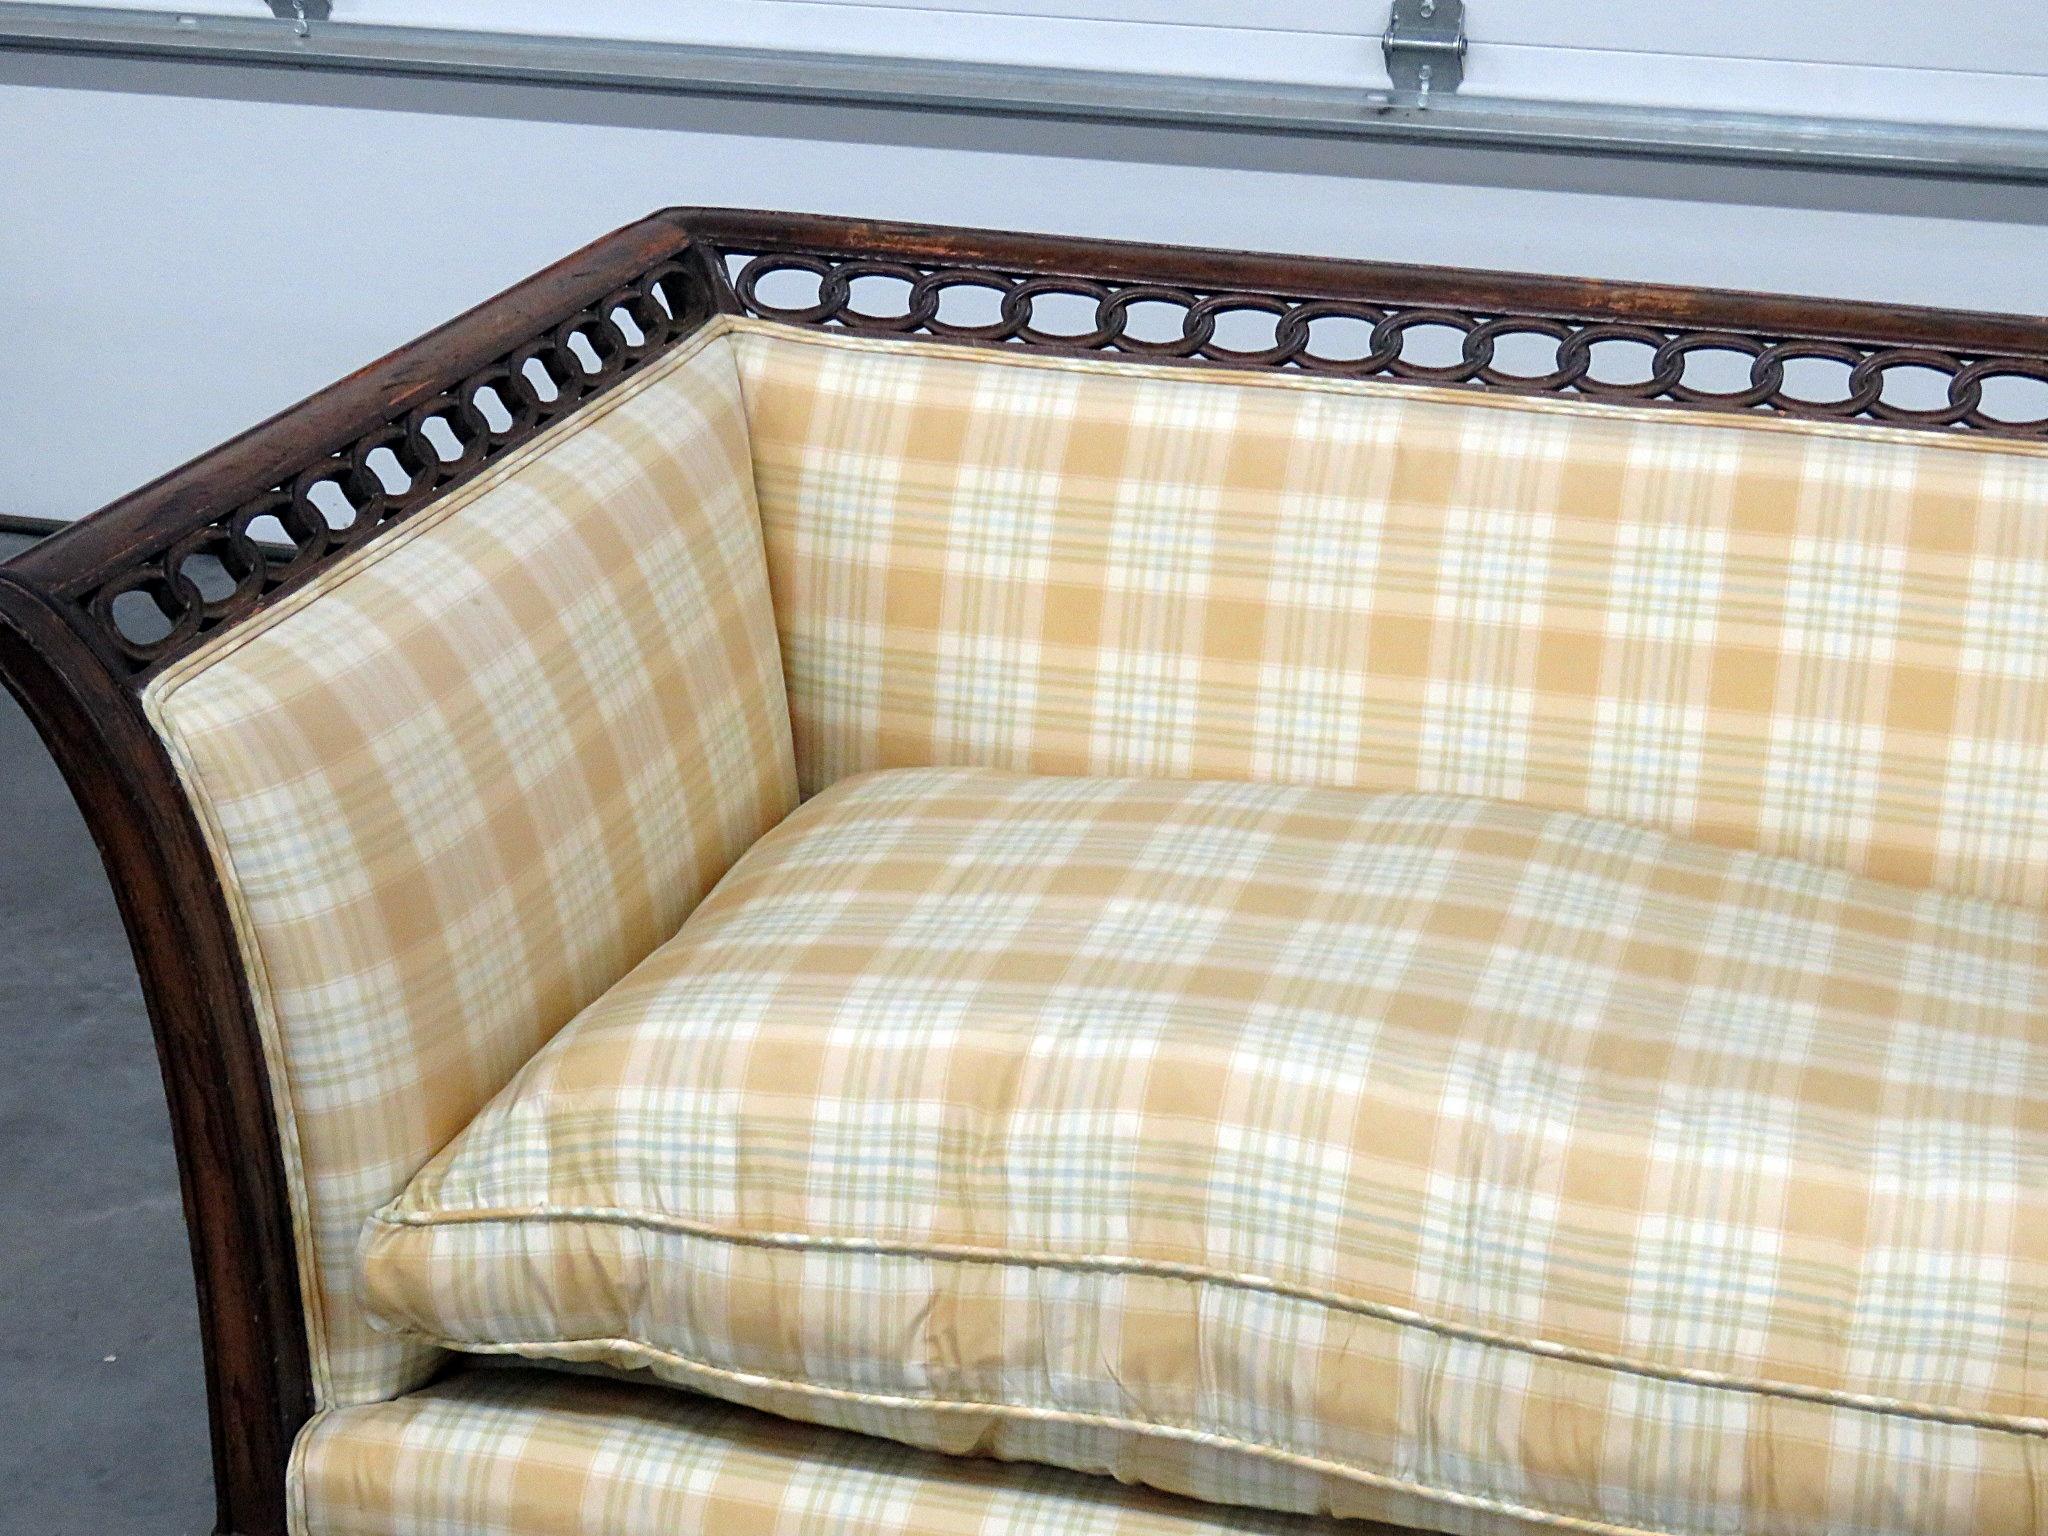 Louis XVI style settee with a distressed finish.